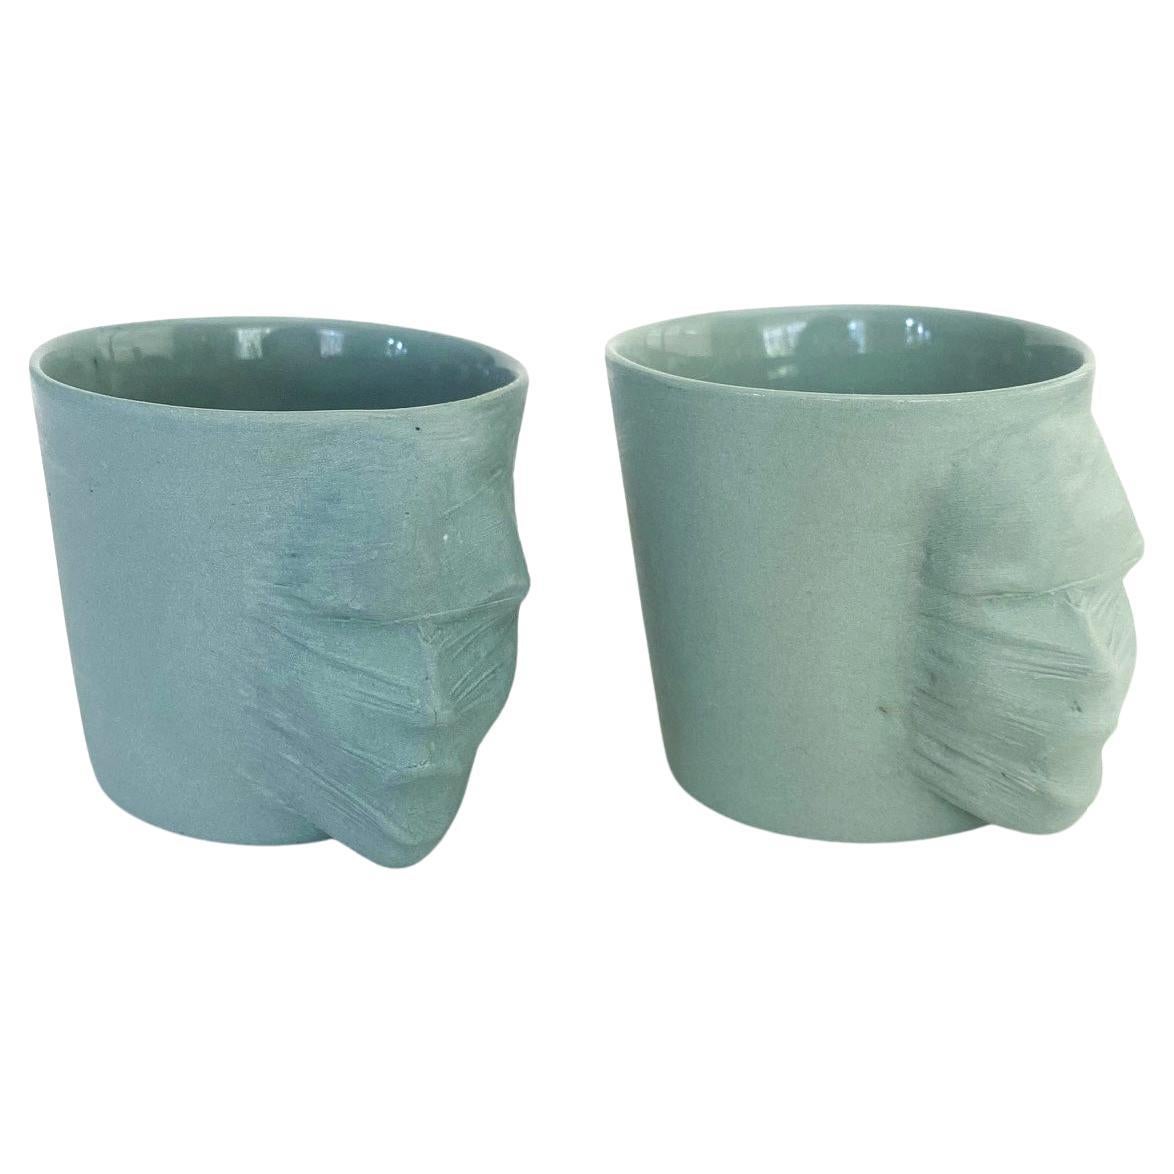 Sculptural Porcelain Cups Set of 2 by Hulya Sozer, Silhouette, Turquoise Shades